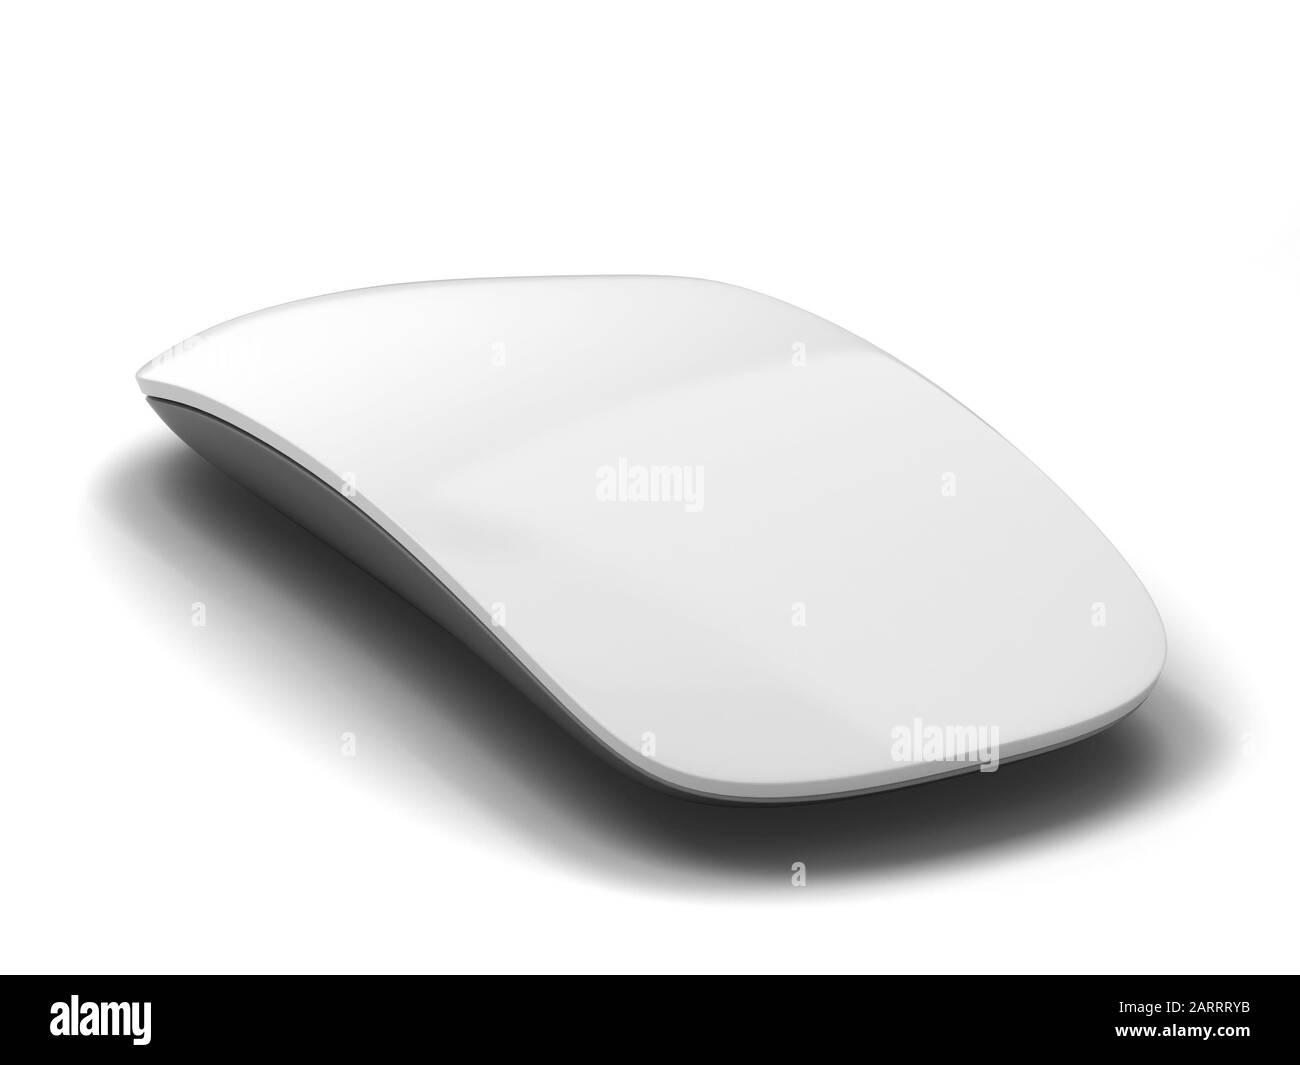 Blank modern computer mouse mockup. 3d illustration isolated on white background Stock Photo